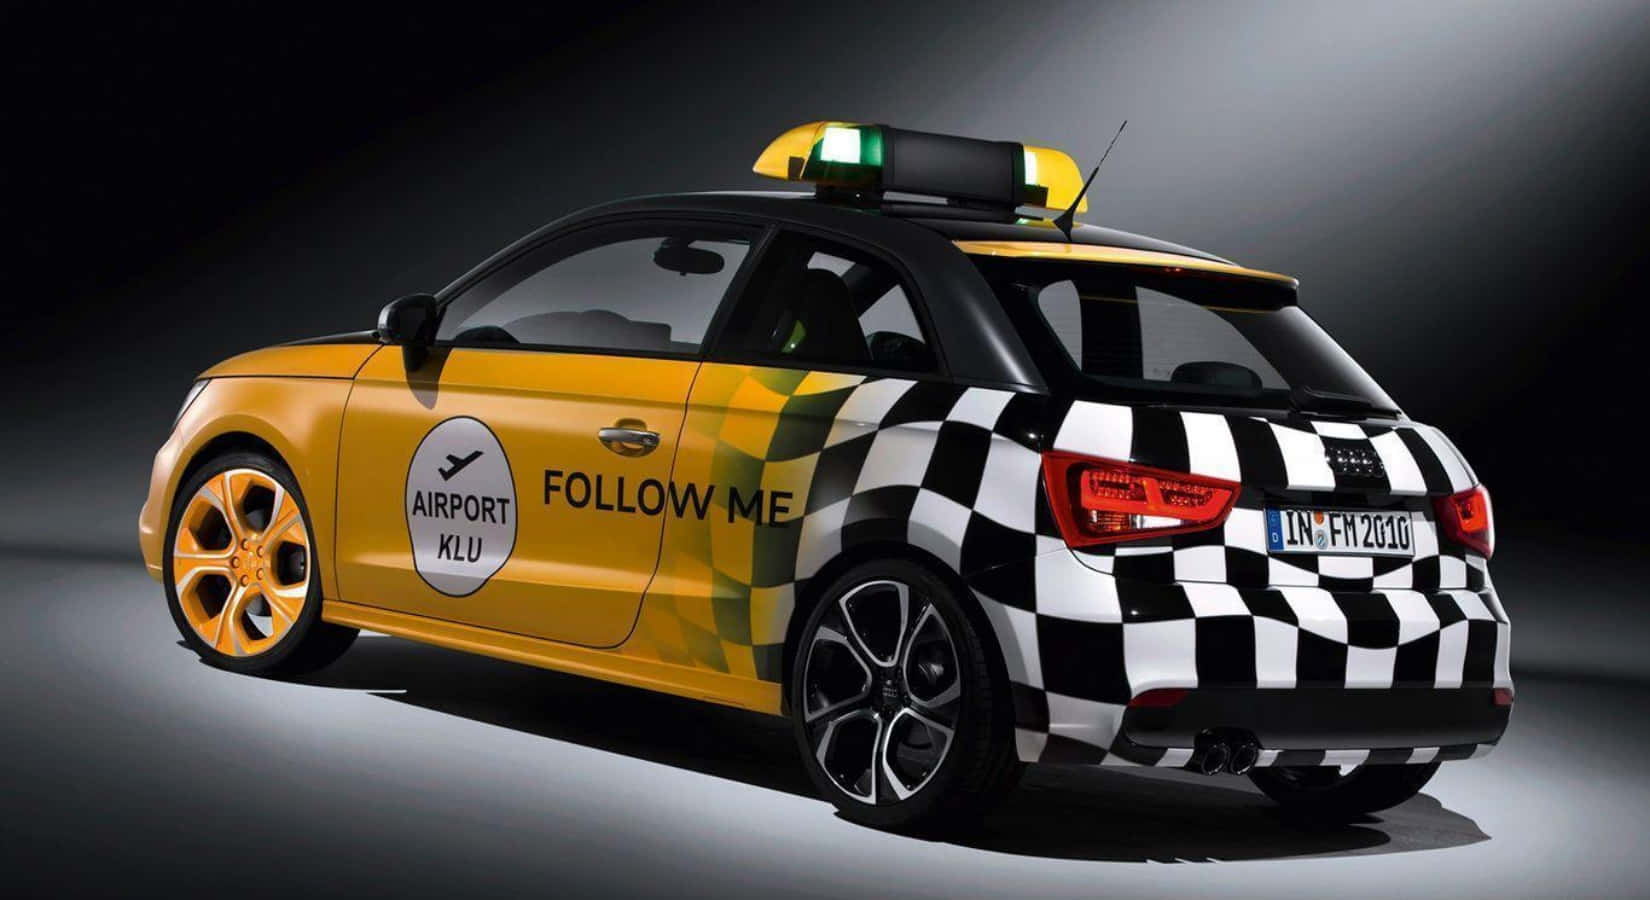 Faster, Safer, More Secure Taxi Rides